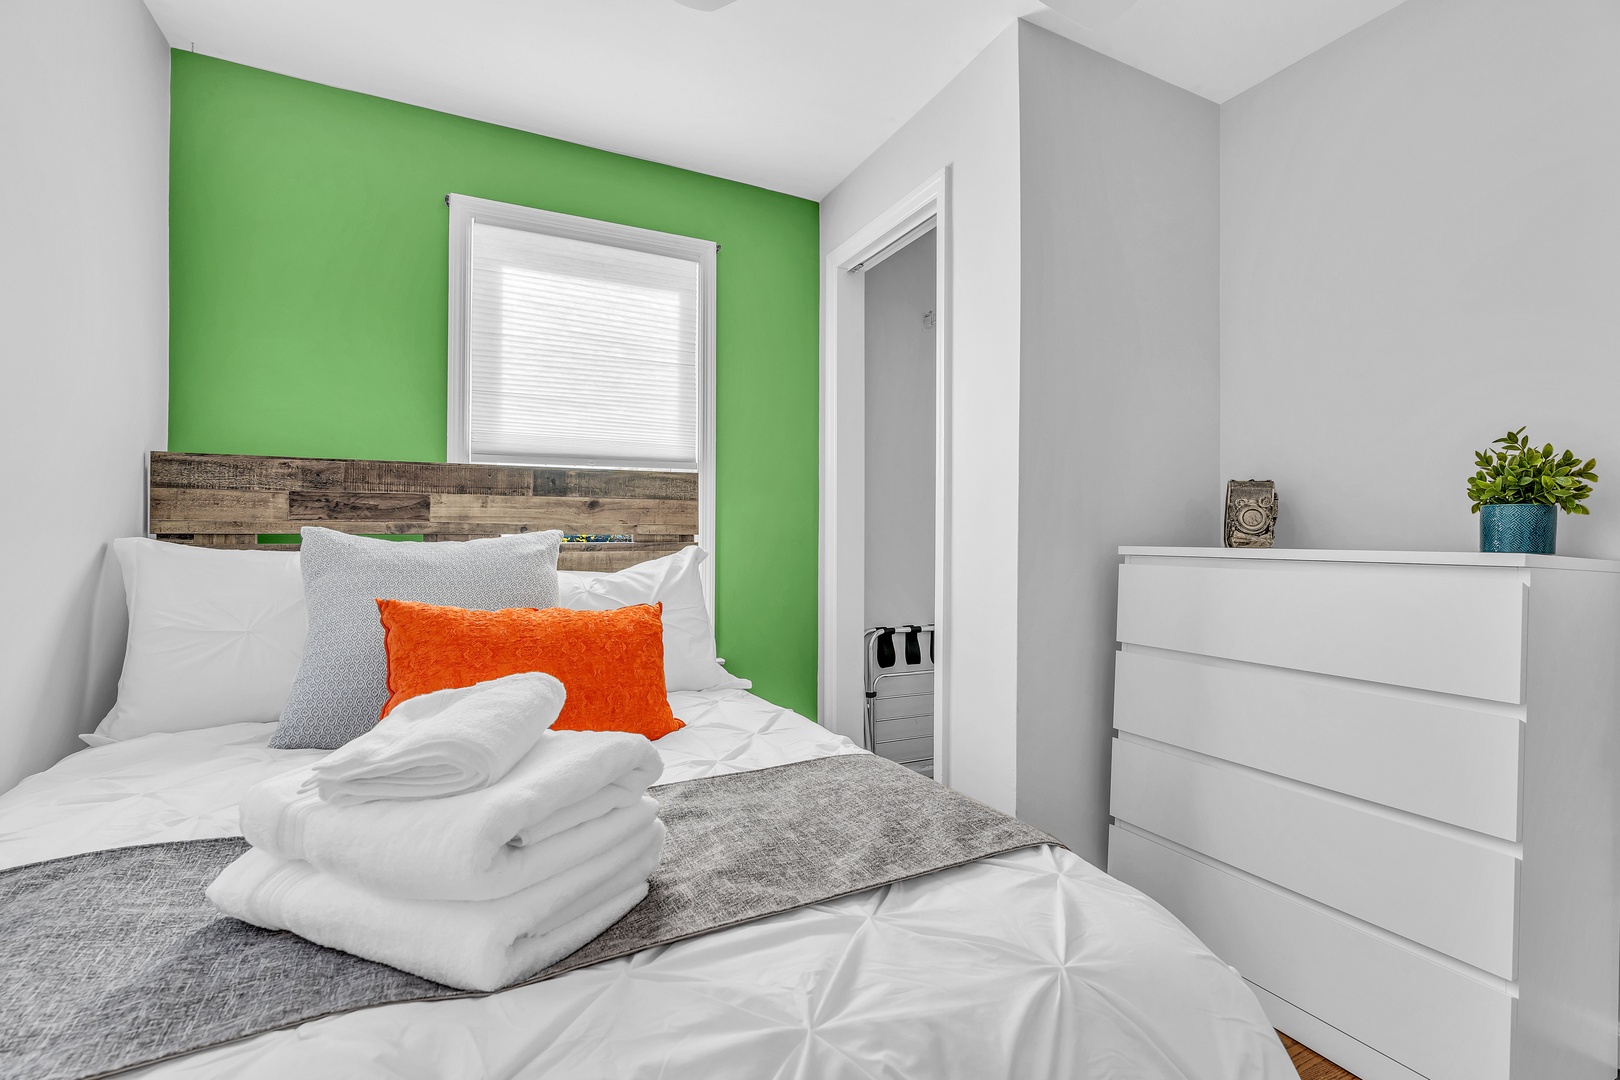 A cozy full-sized bed awaits in this colorful 2nd-floor bedroom